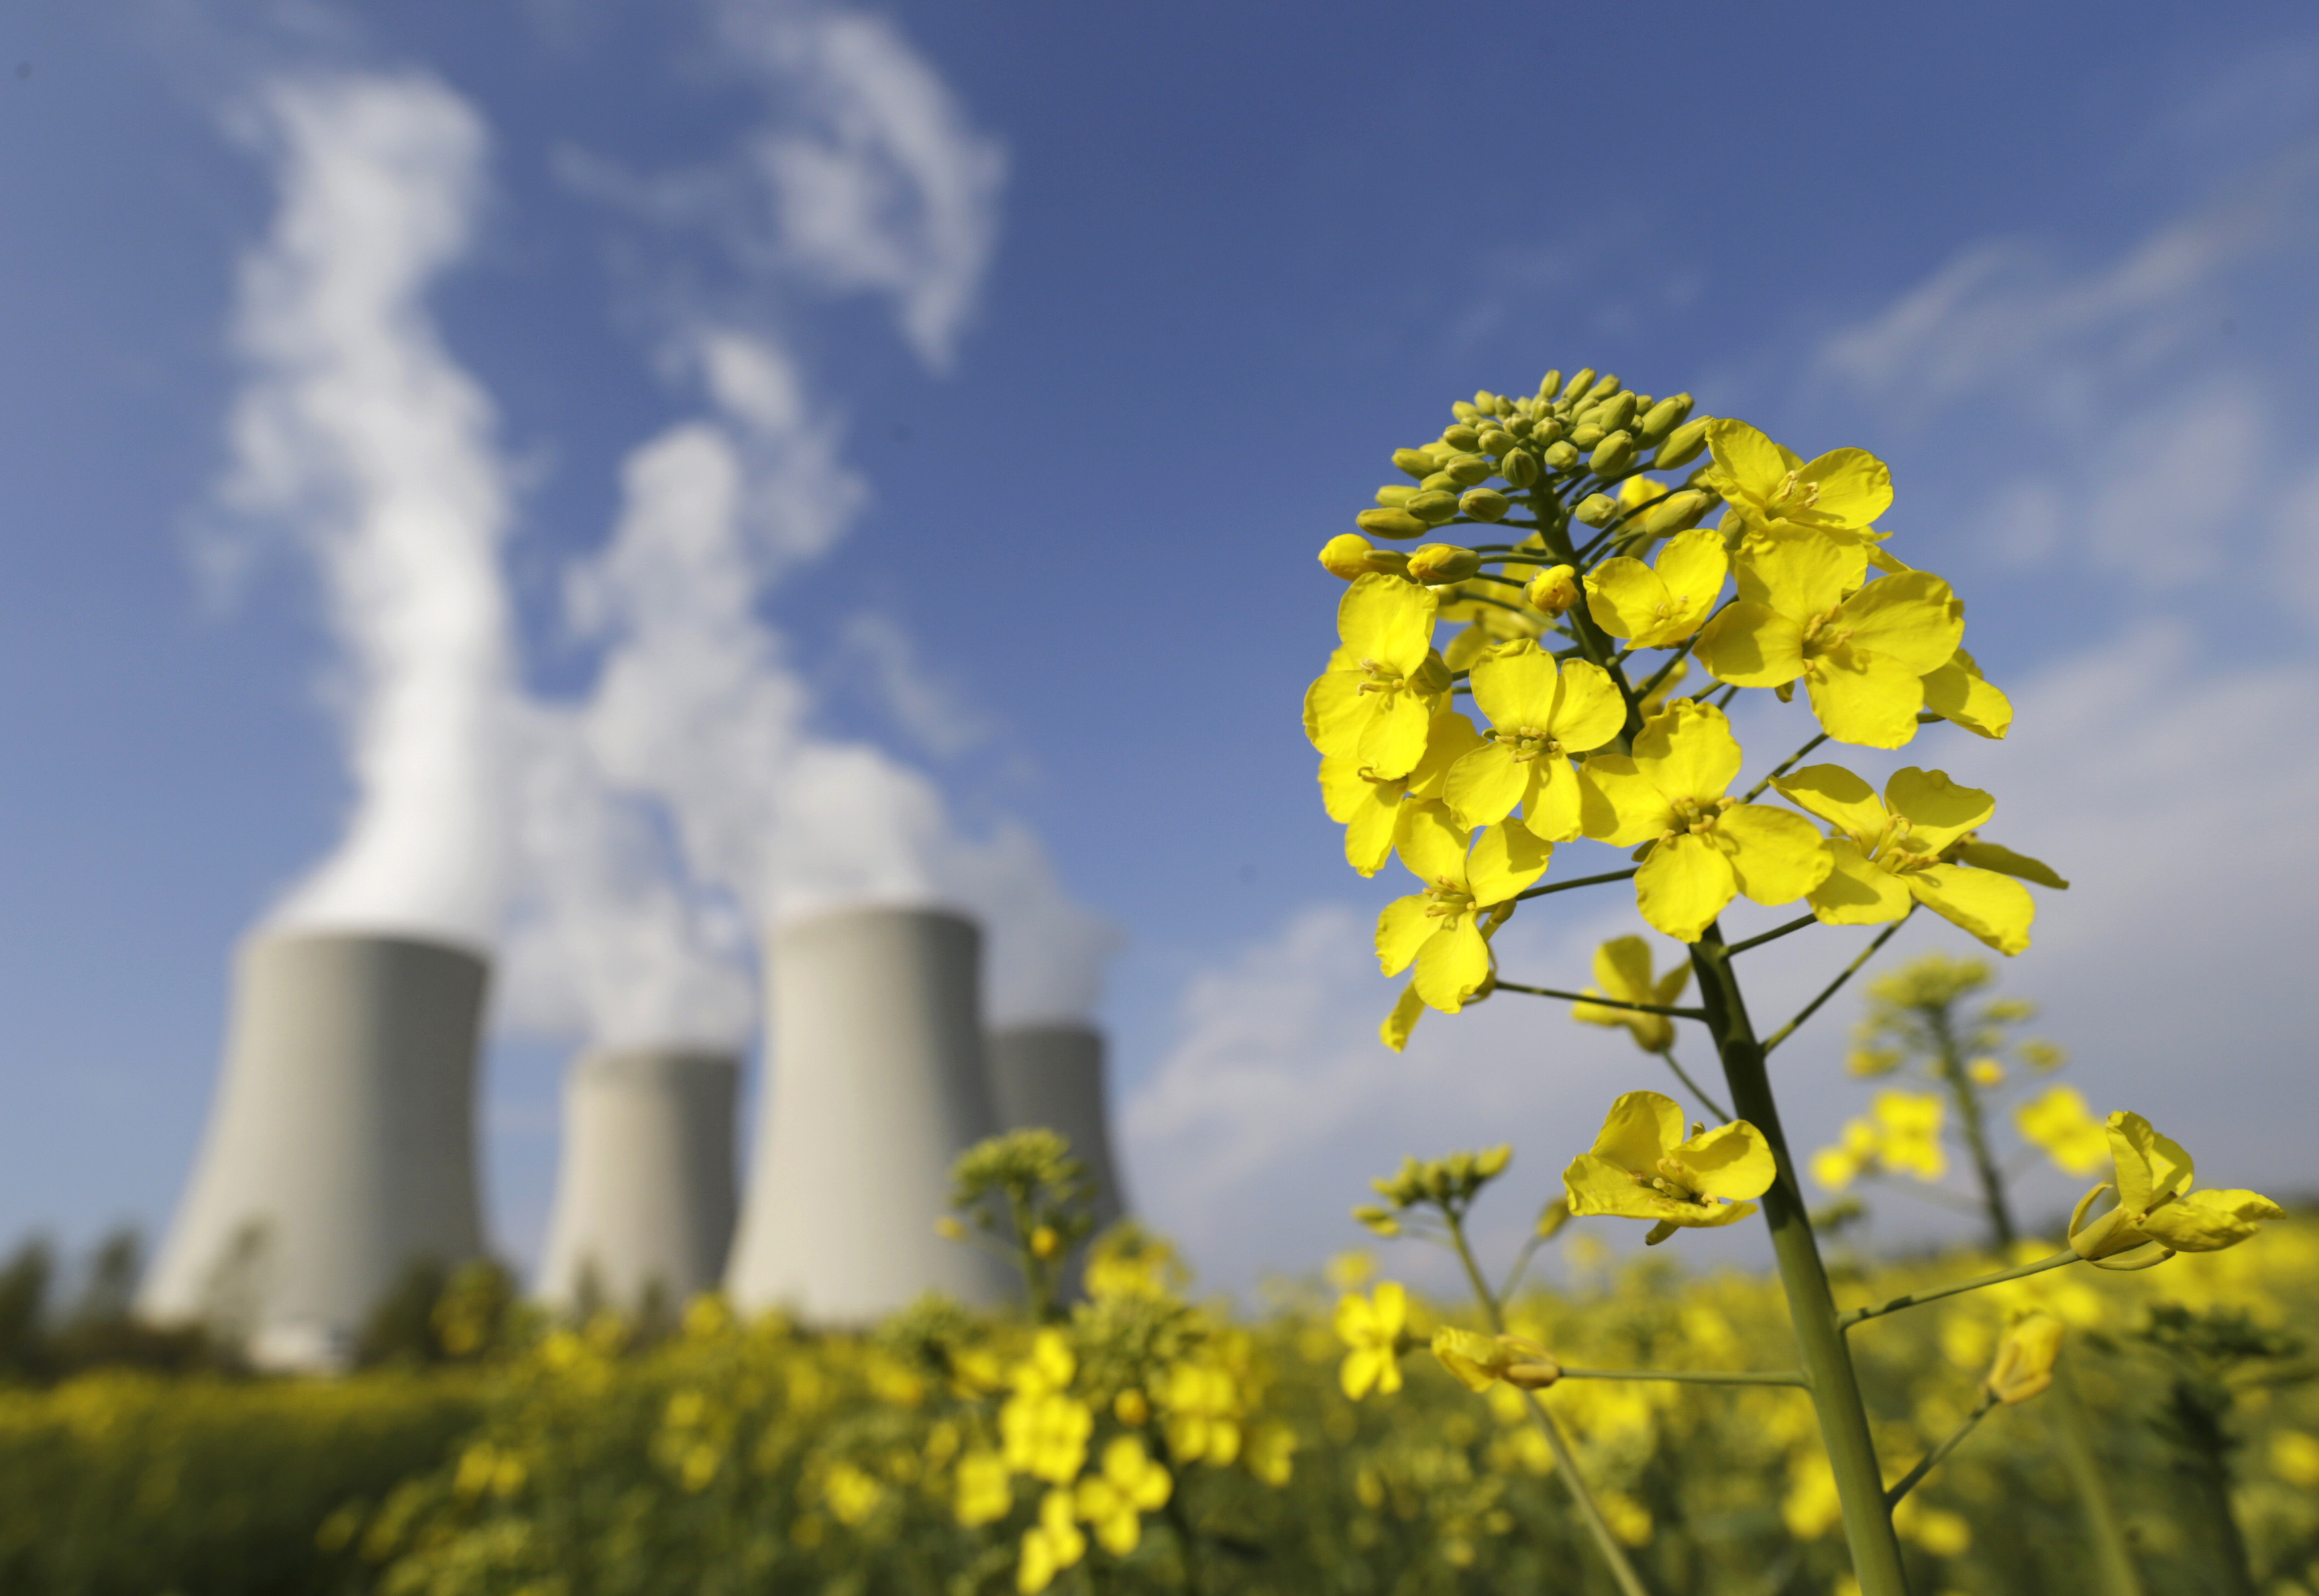 A mustard field is seen in front of the cooling towers of the Temelin nuclear power plant near Tyn nad Vltavou